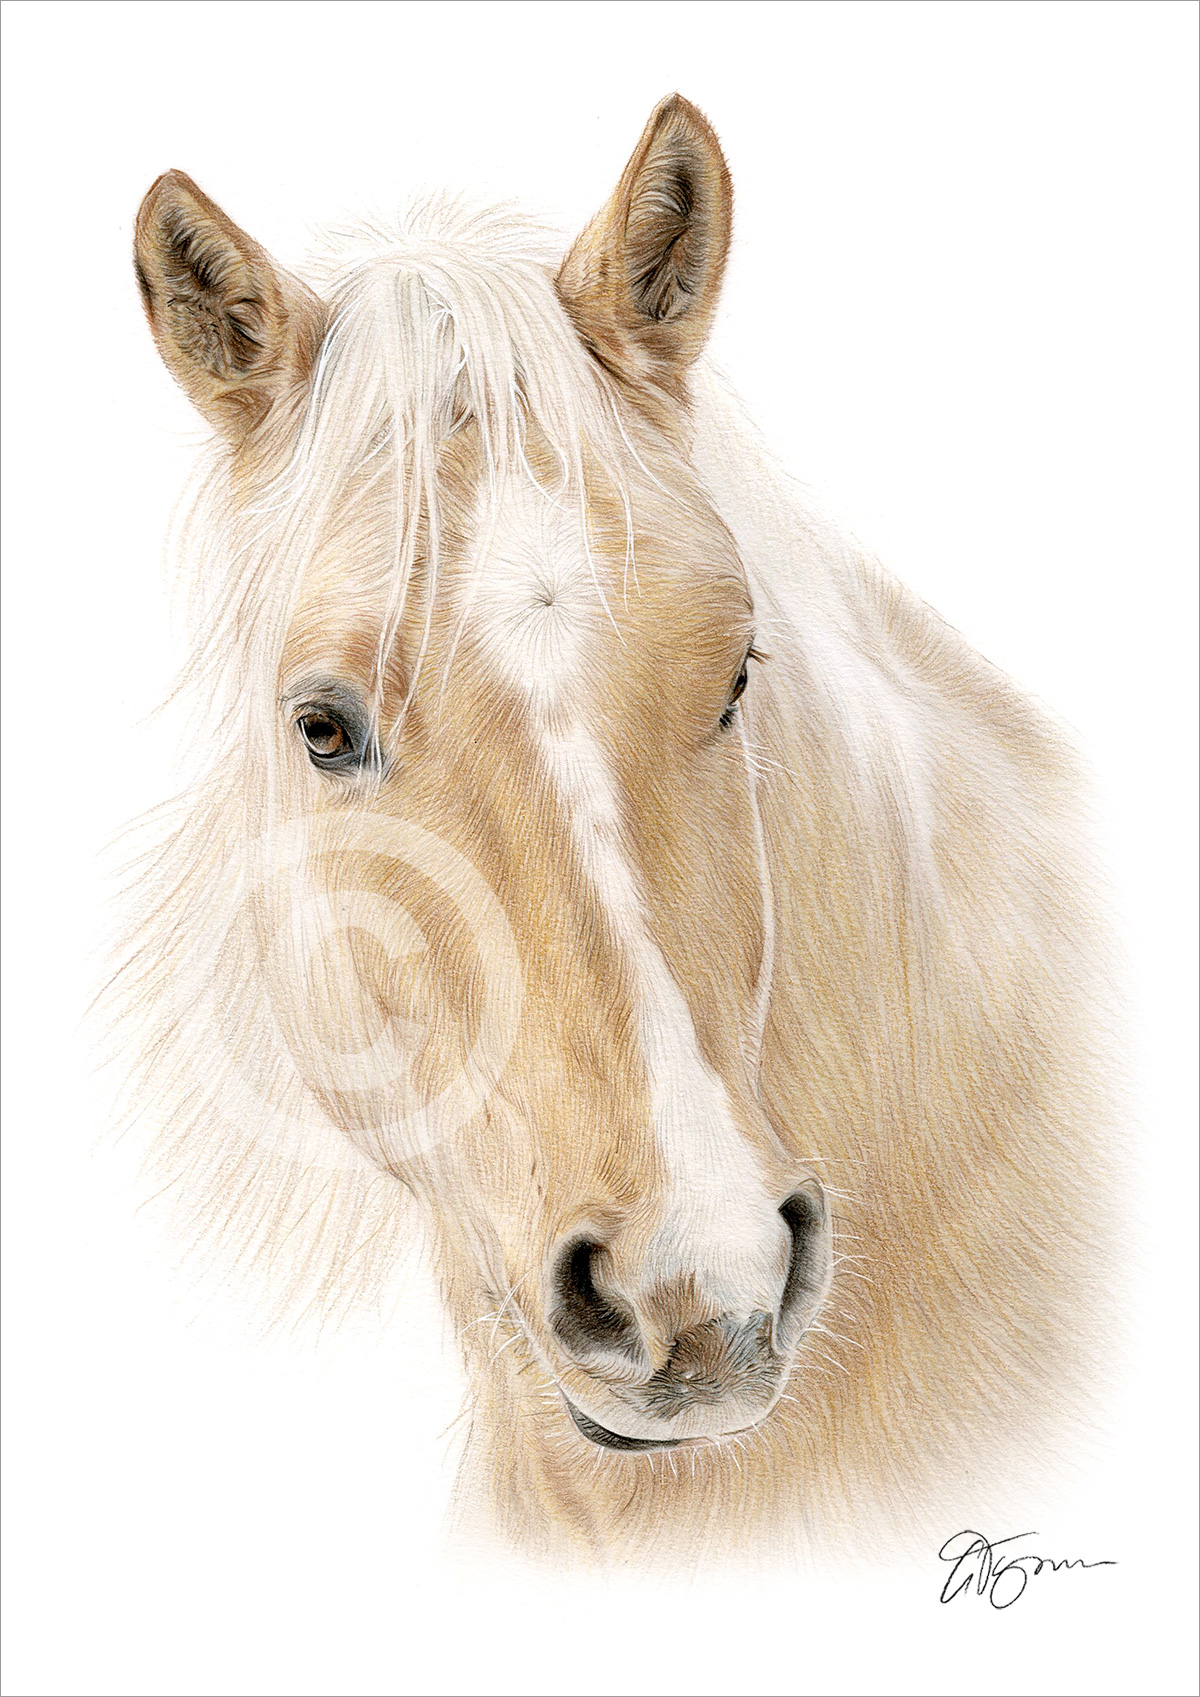 Colour pencil drawing of a Palomino horse by artist Gary Tymon